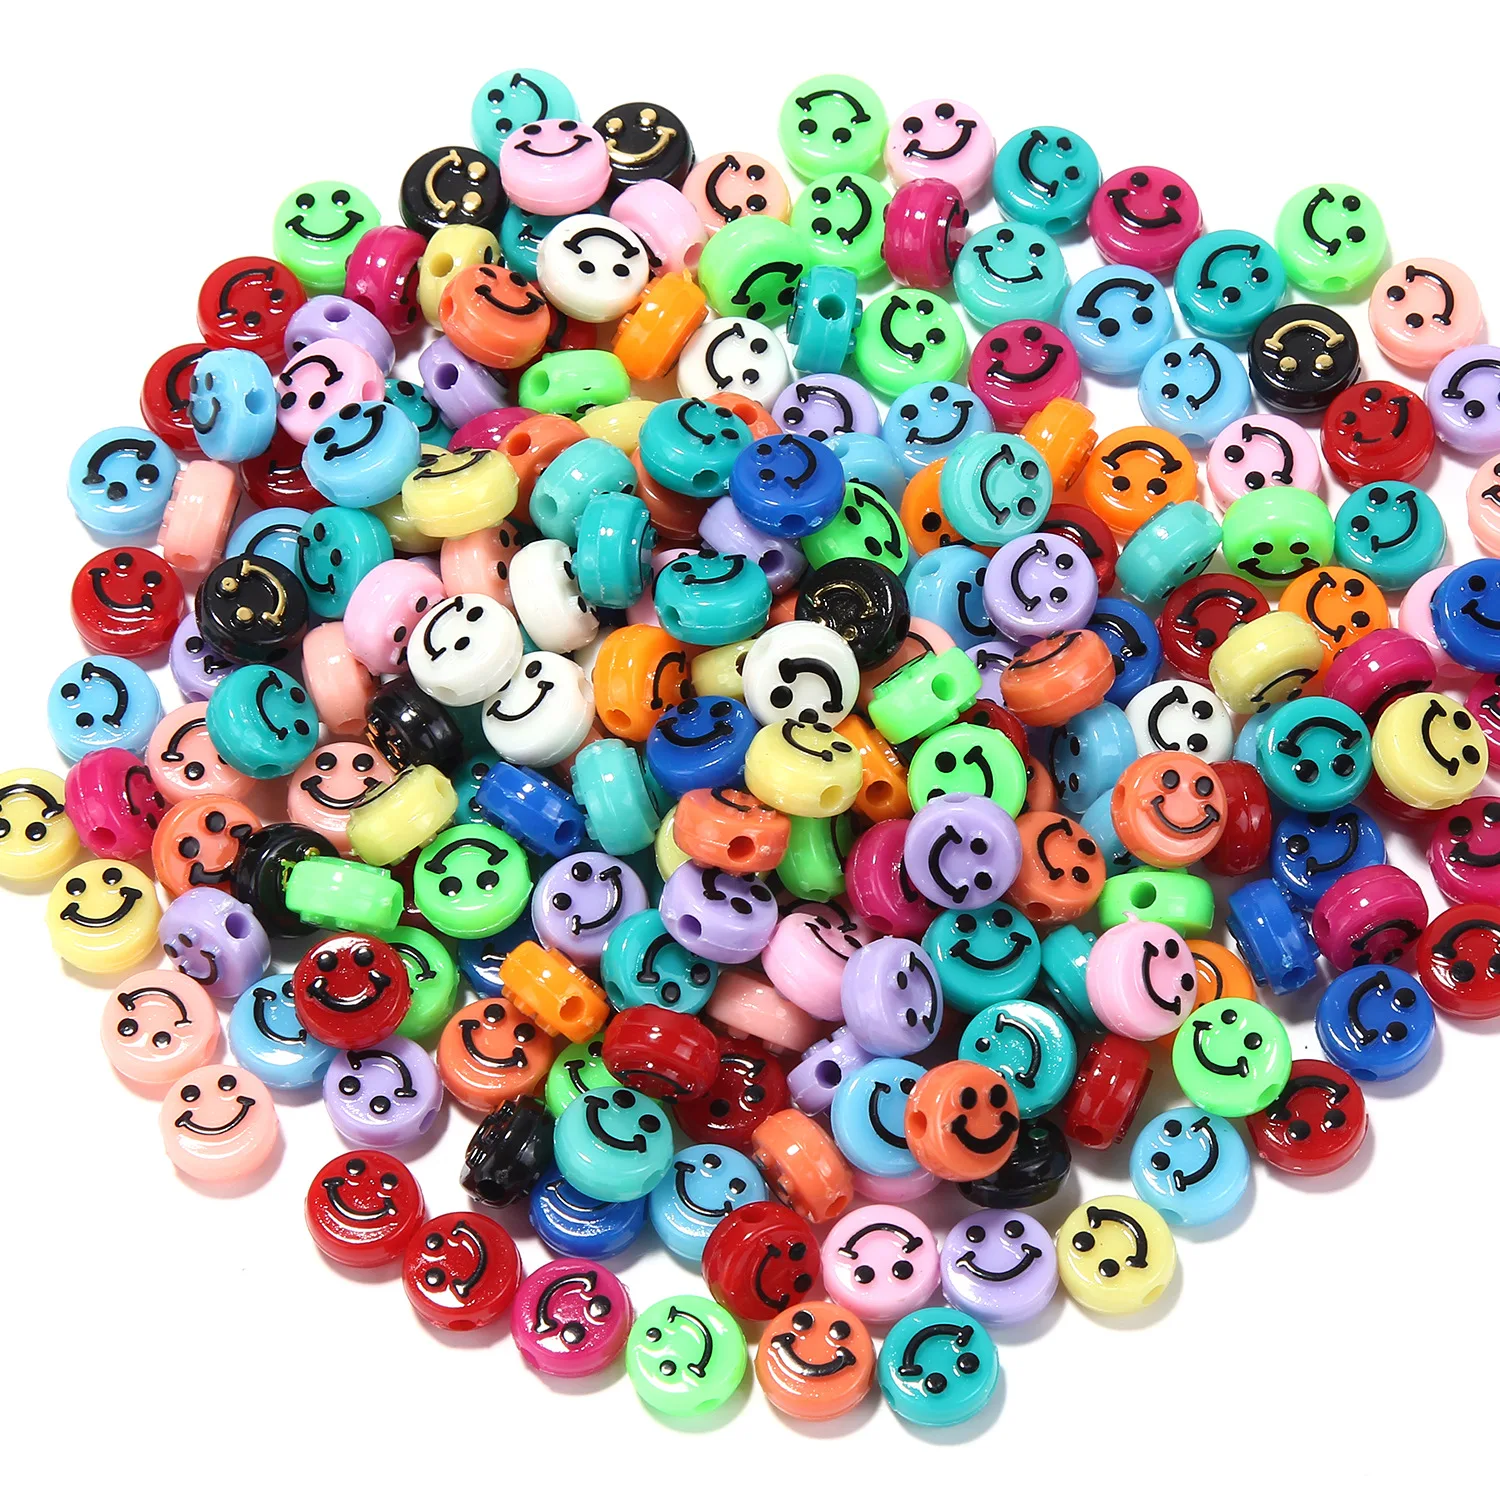 

Wholesale Cheap 6*10mm Acrylic Plastic Smile Happy Face Jewelry Finding Accessories Spacer Beads For DIY Jewelry Making